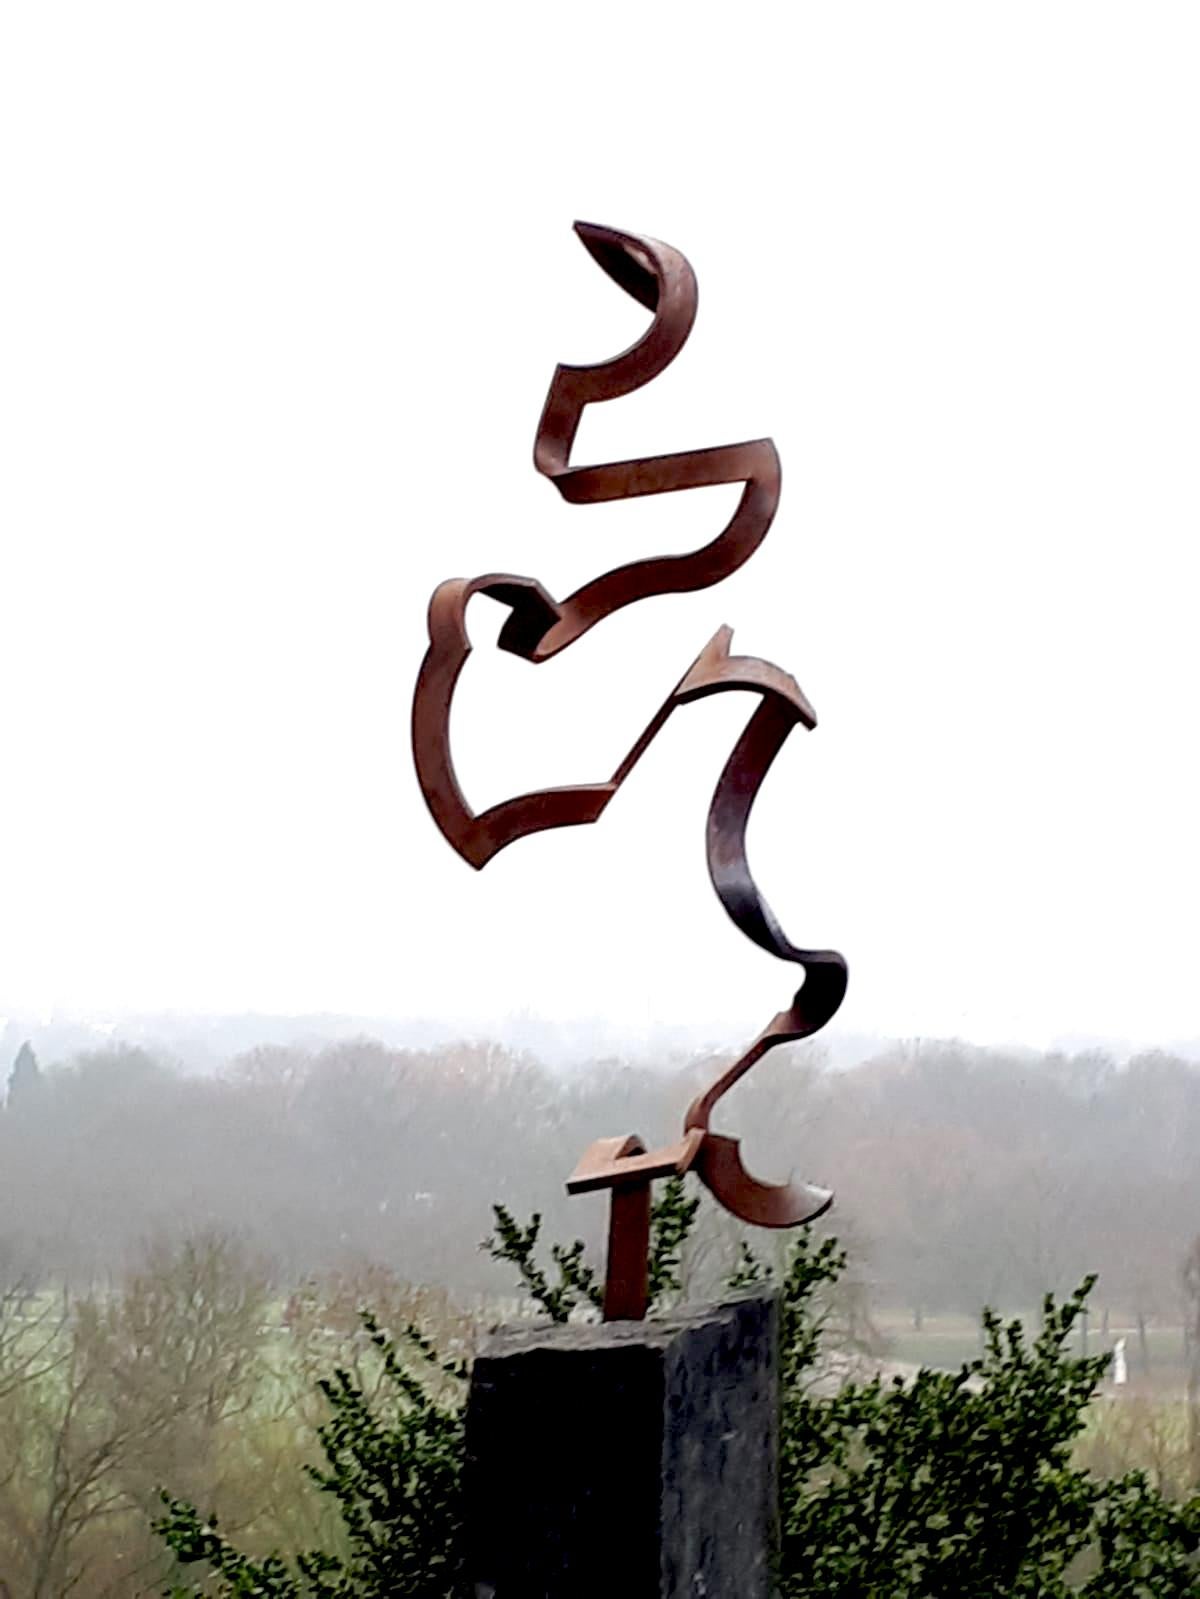 This beautiful large corroded steel  sculpture can be used for indoor or outdoors. It makes for an elegant statement in any garden, lobby or private home.

Artist: Kuno Vollet
Size: 108 x 25 x 25